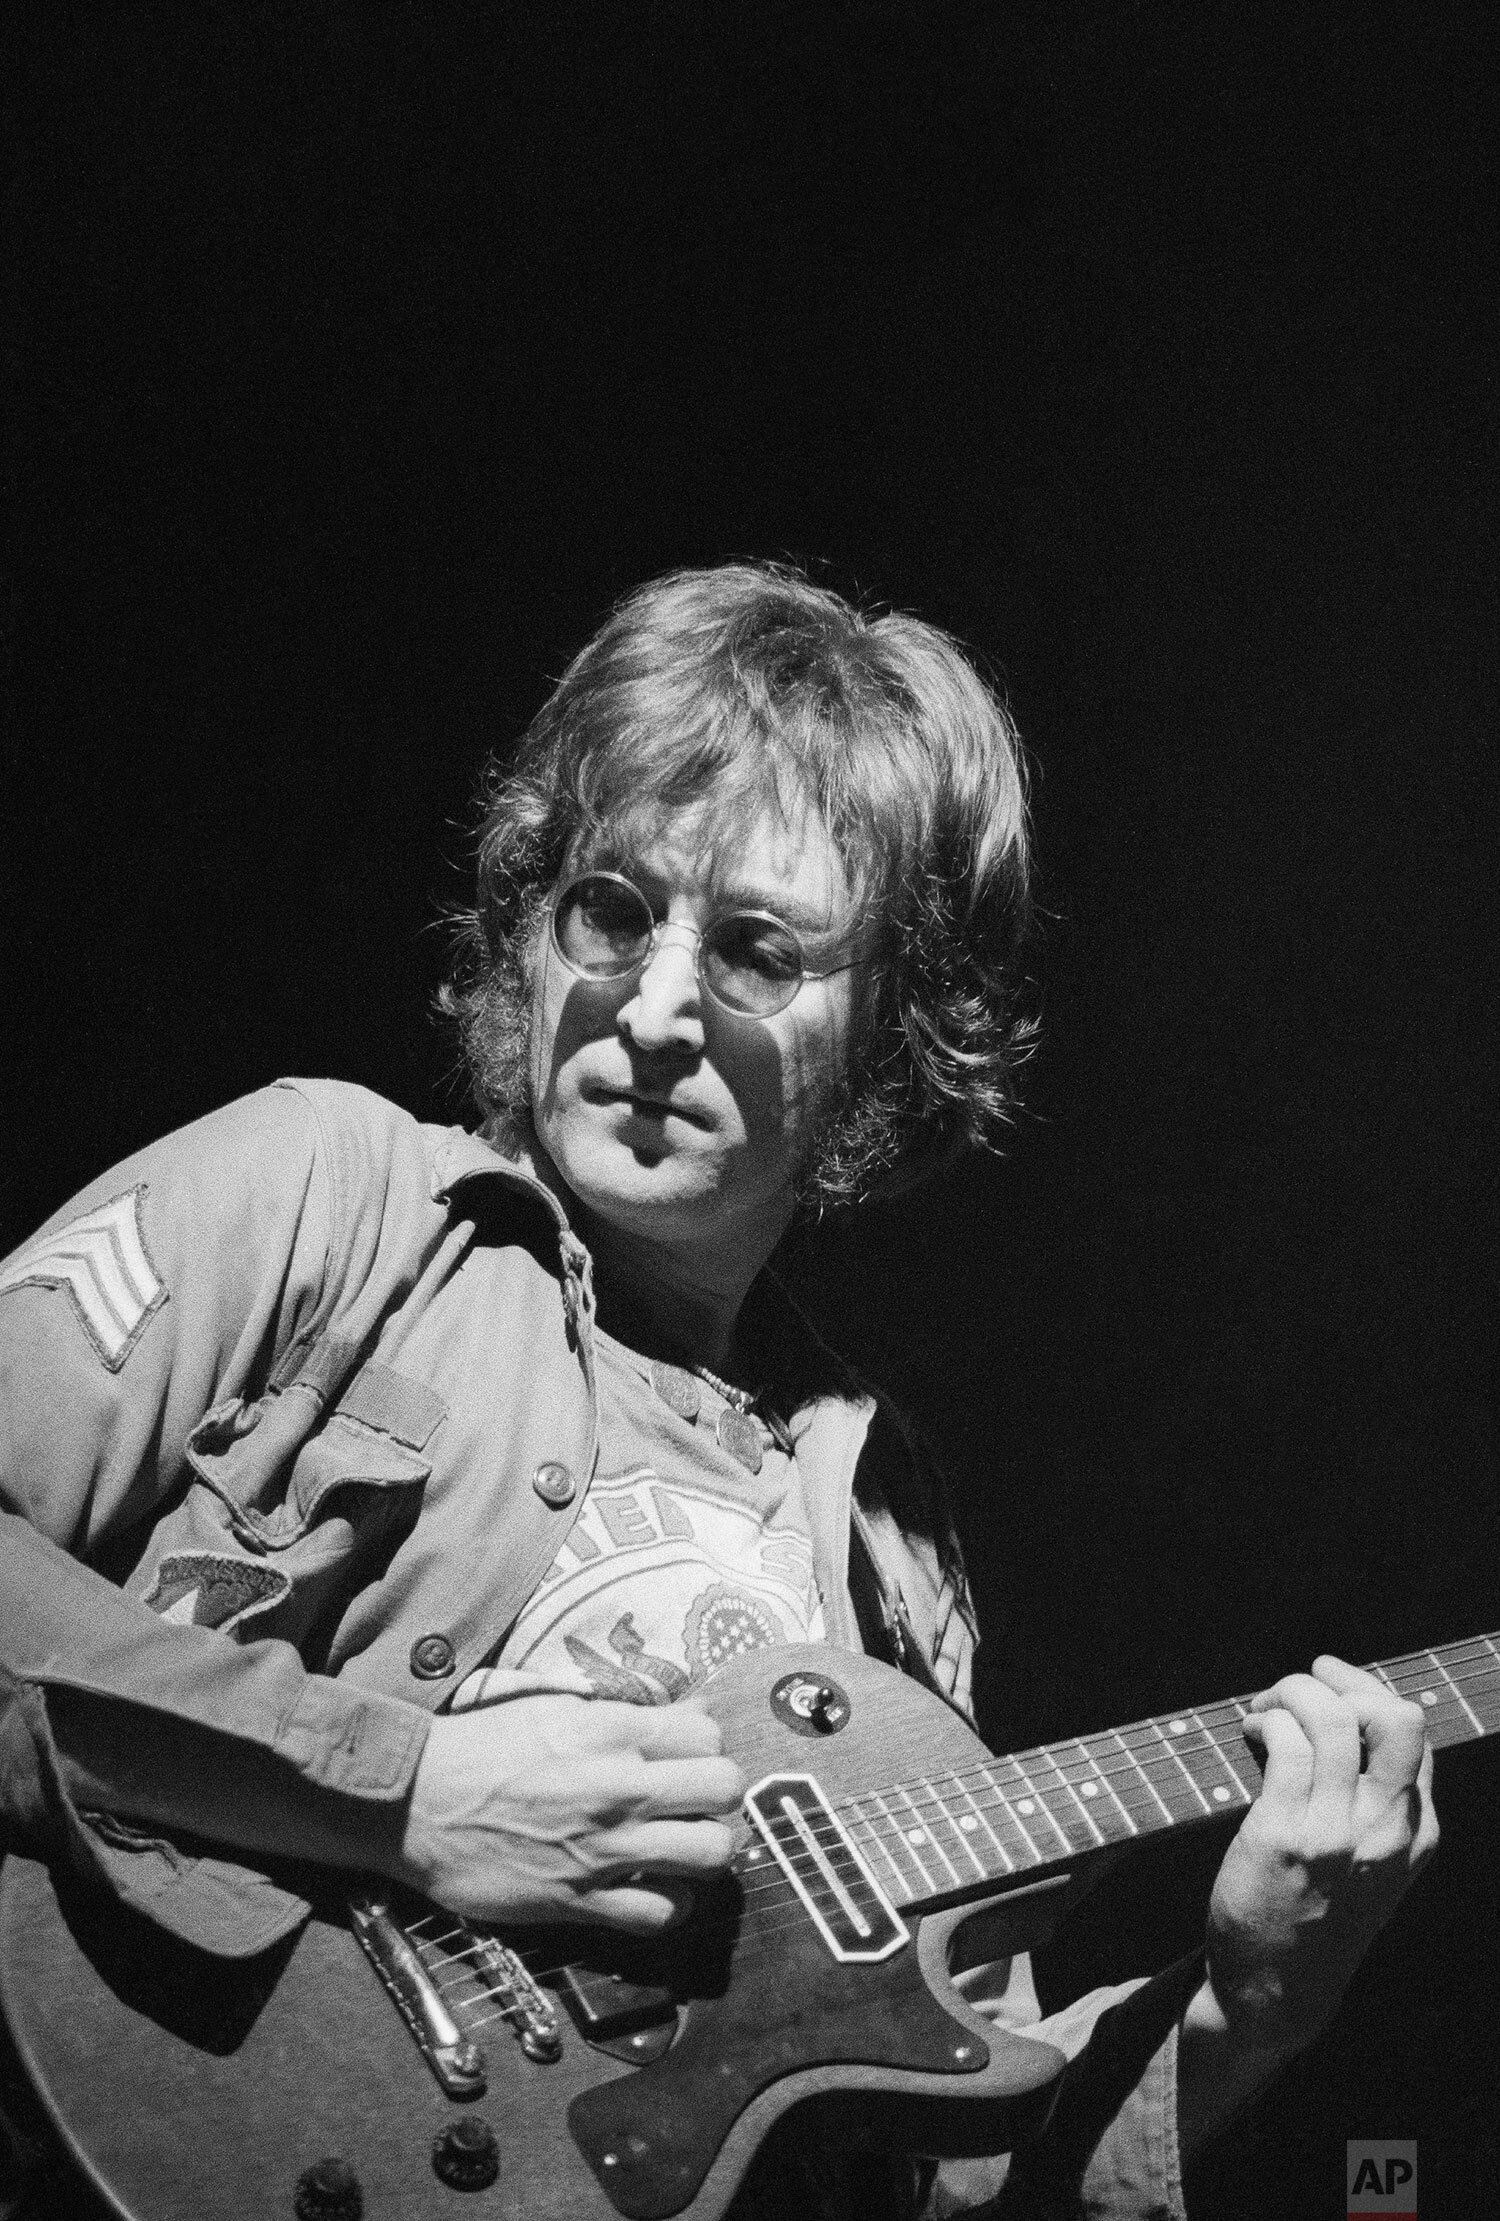  Former Beatle John Lennon performs during the One To One concert, a charity to benefit mentally challenged children at New York's Madison Square Garden, Aug. 30, 1972. (AP Photo) 